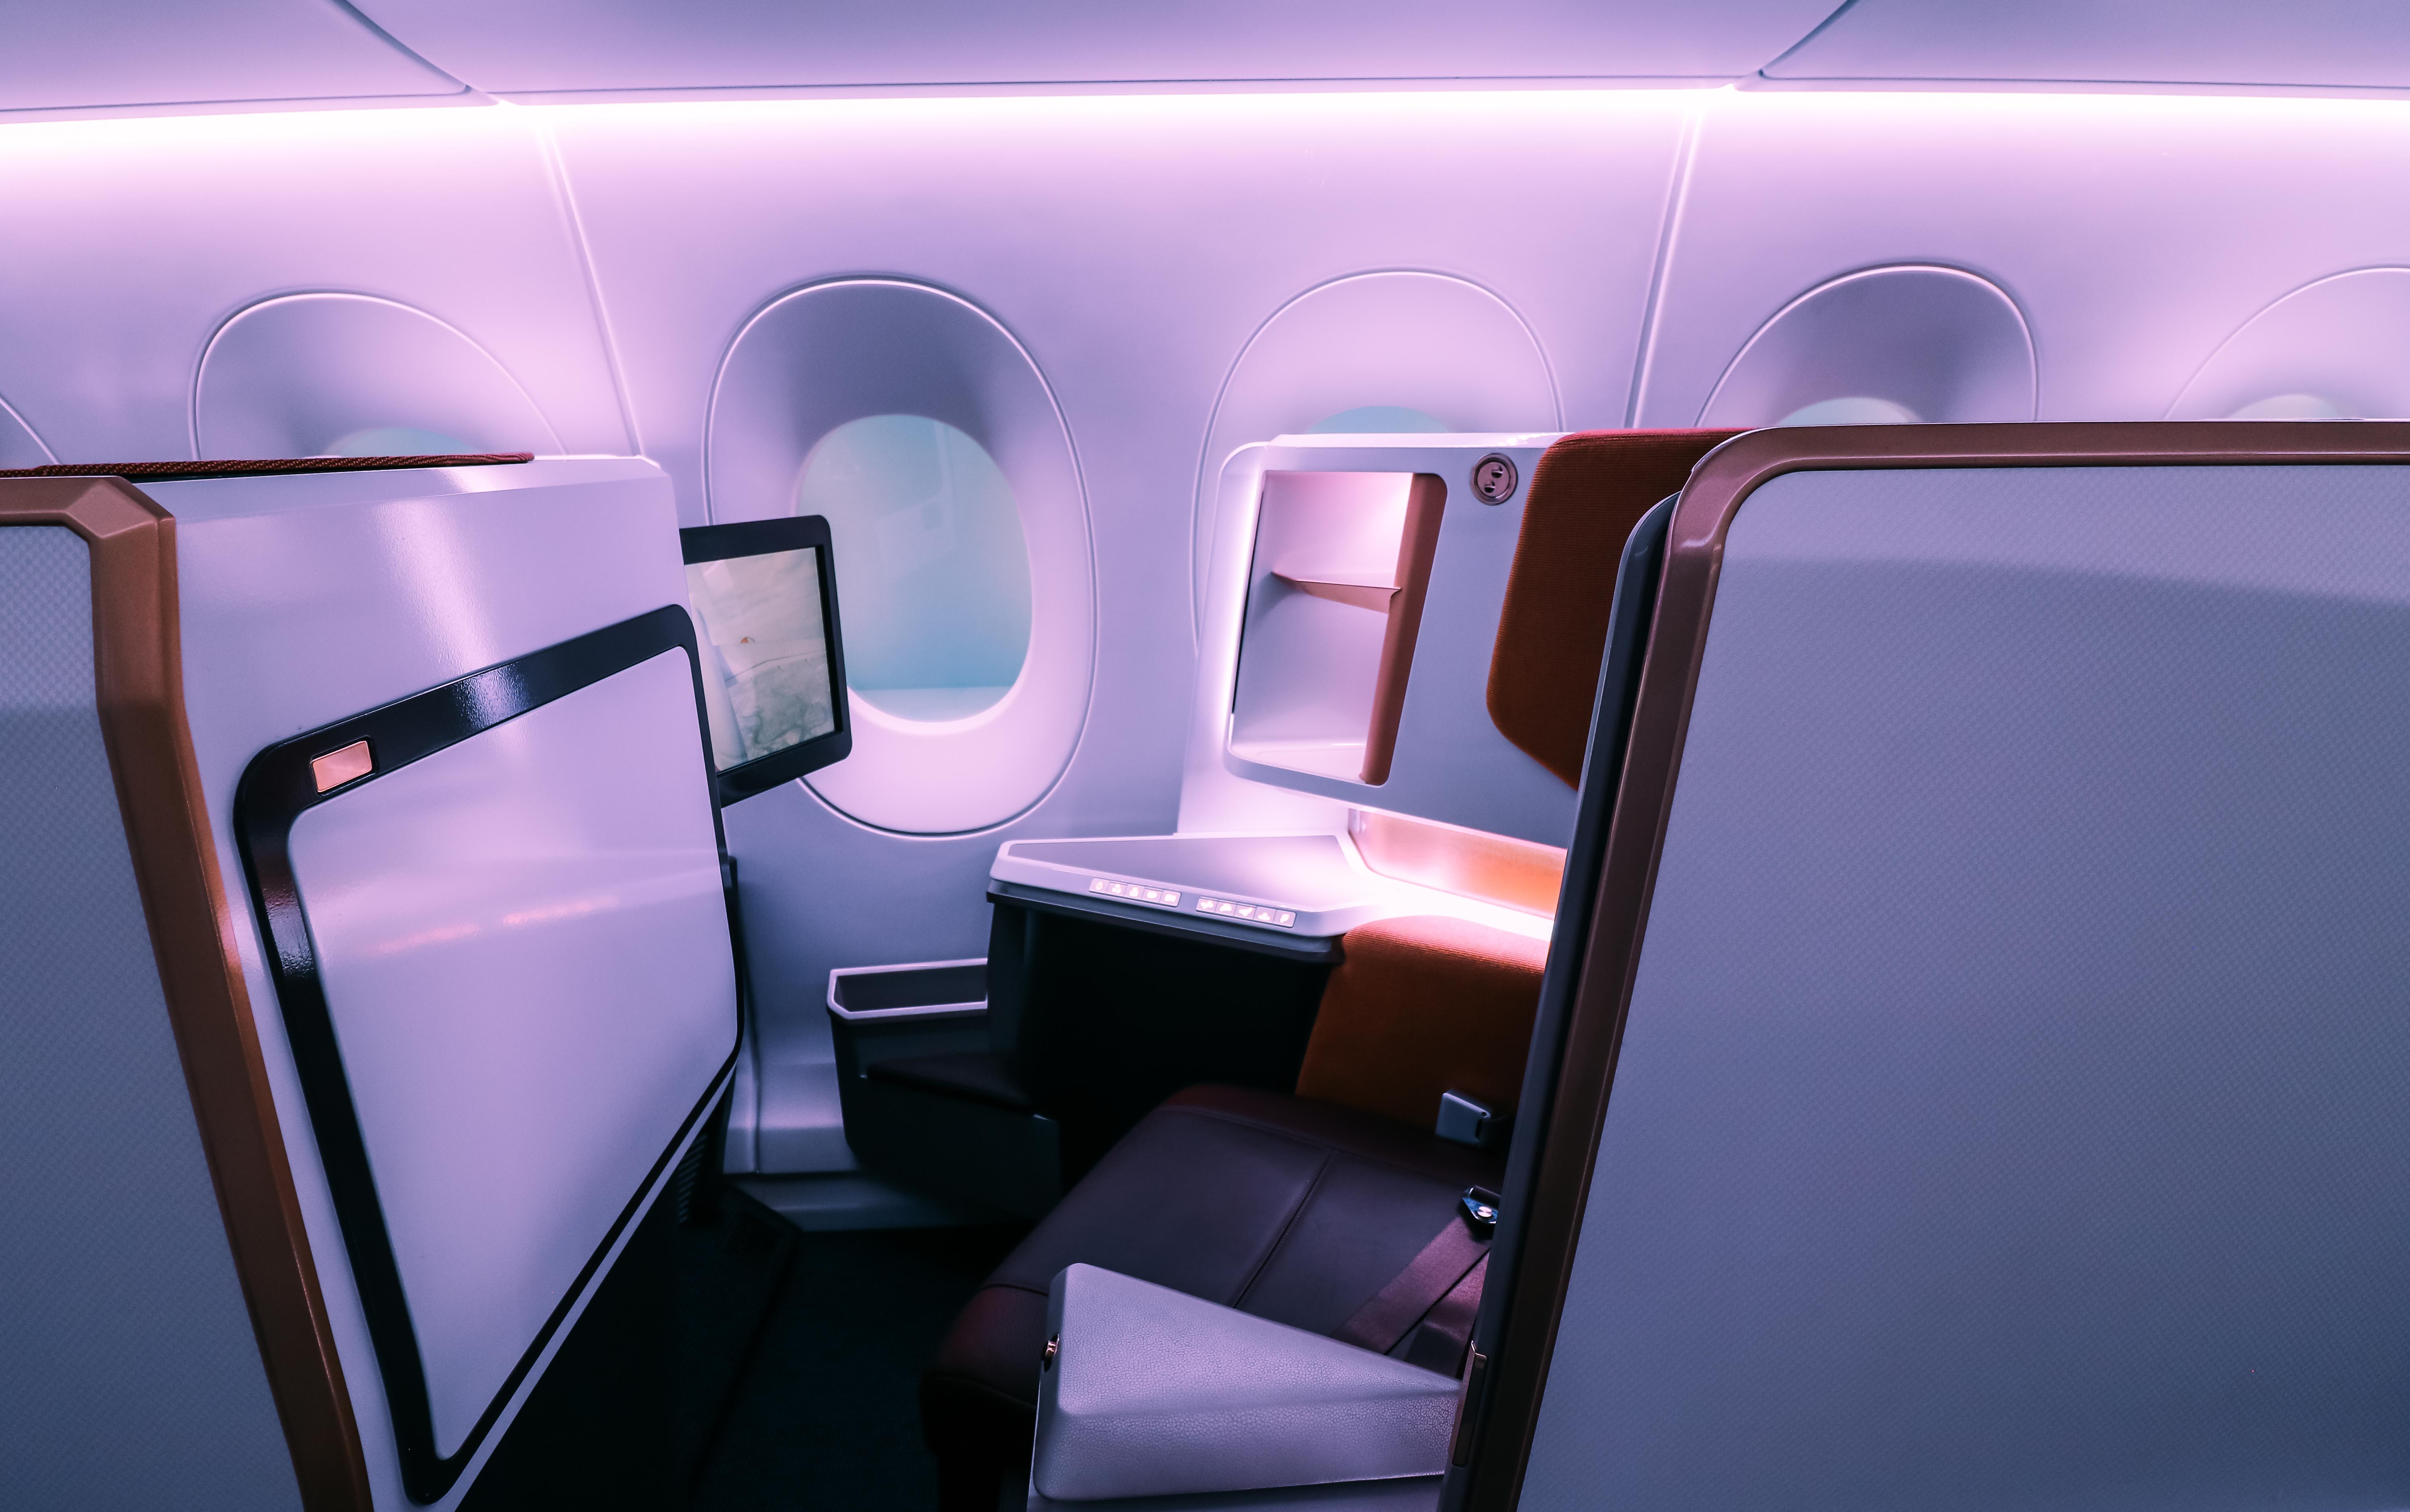 Virgin Atlantic S New Business Class Seats Disappoint View